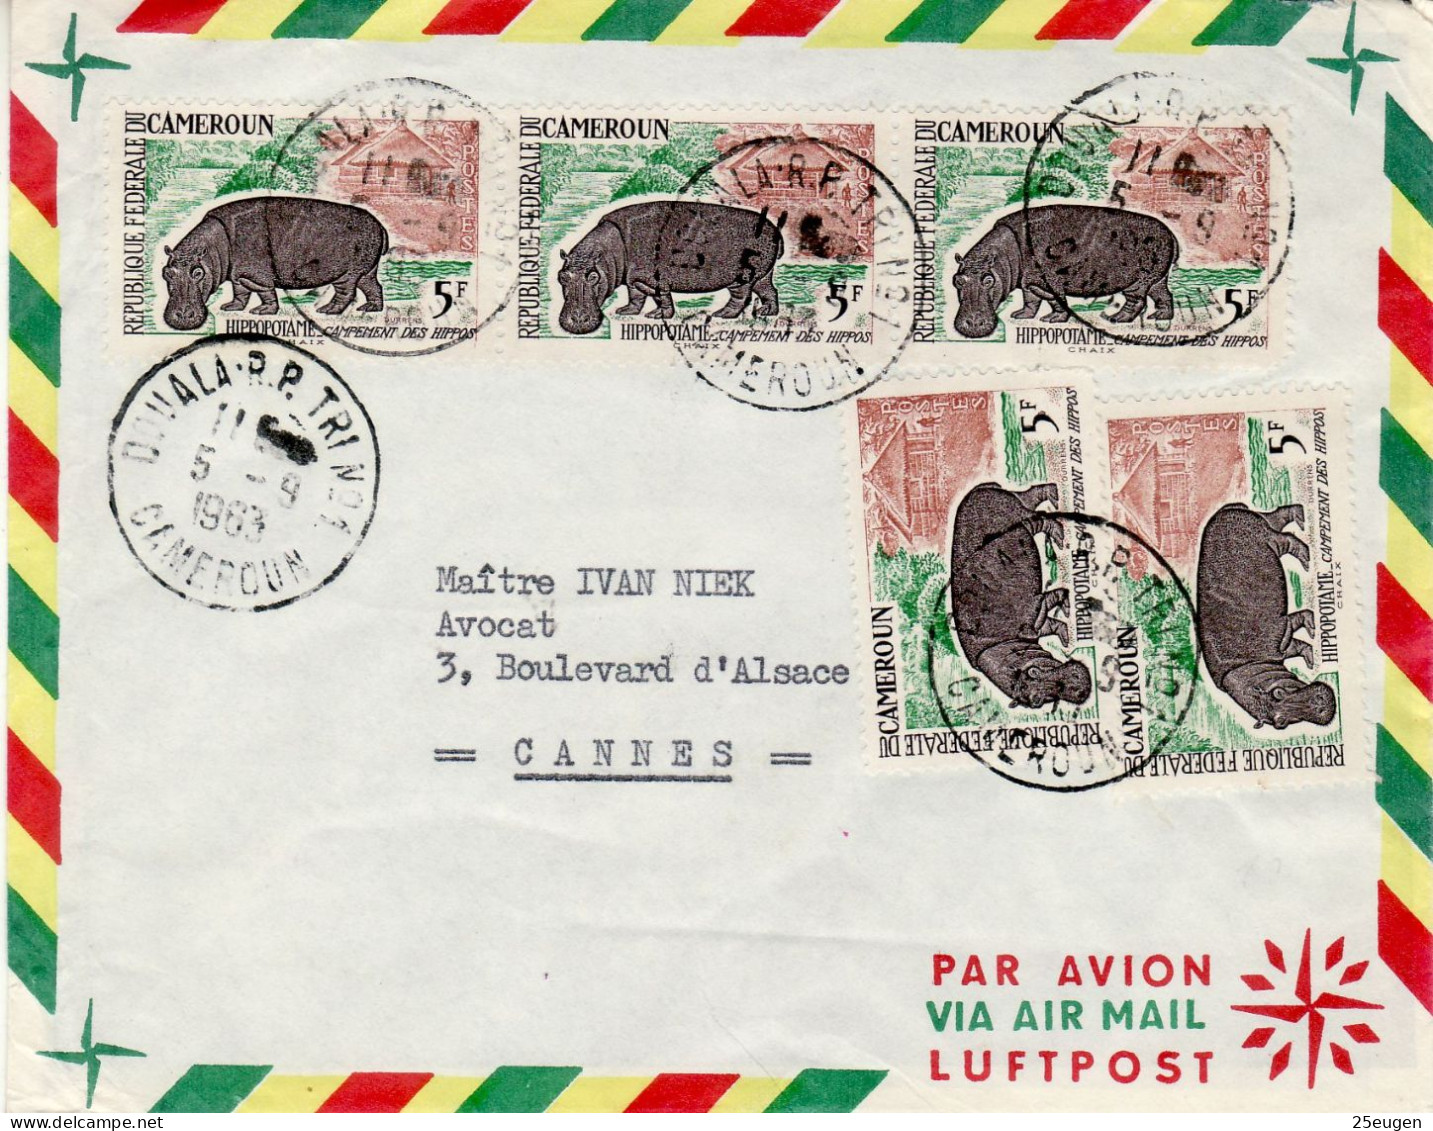 CAMEROON 1963 AIRMAIL LETTER SENT FROM DOUALA TO CANNES - Camerun (1960-...)